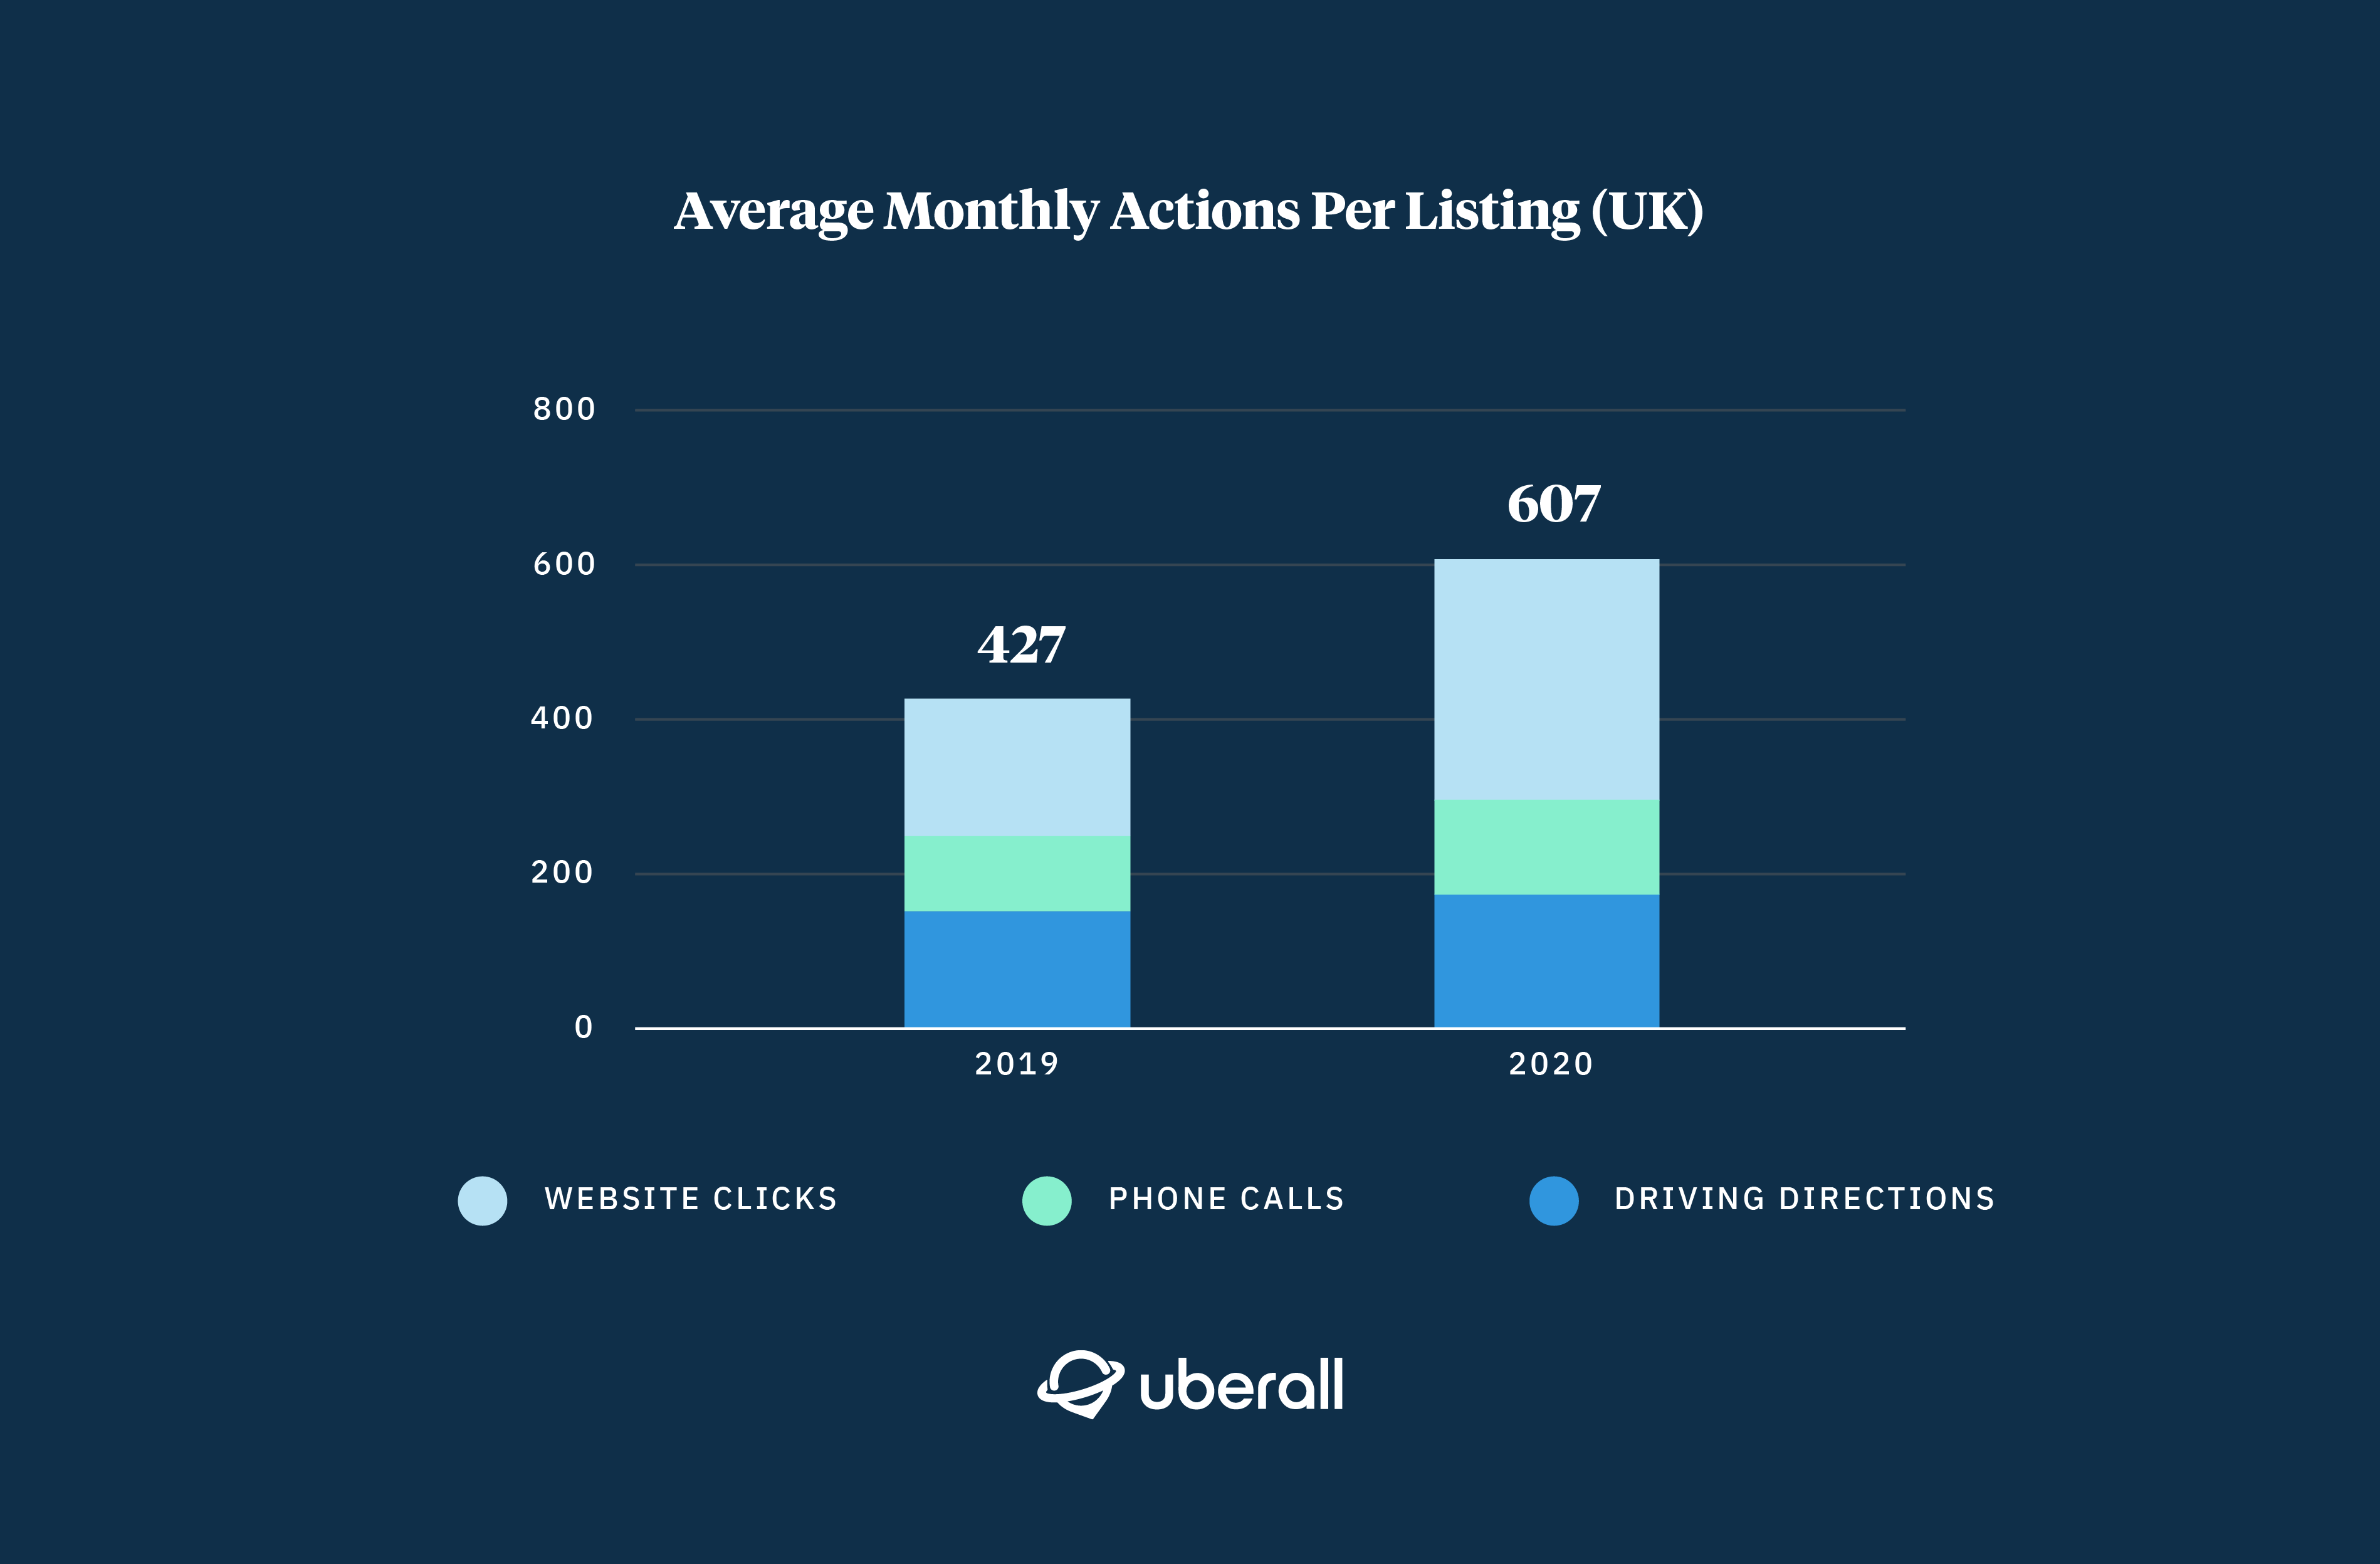 Average monthly actions per listing in the UK in 2020 vs 2019